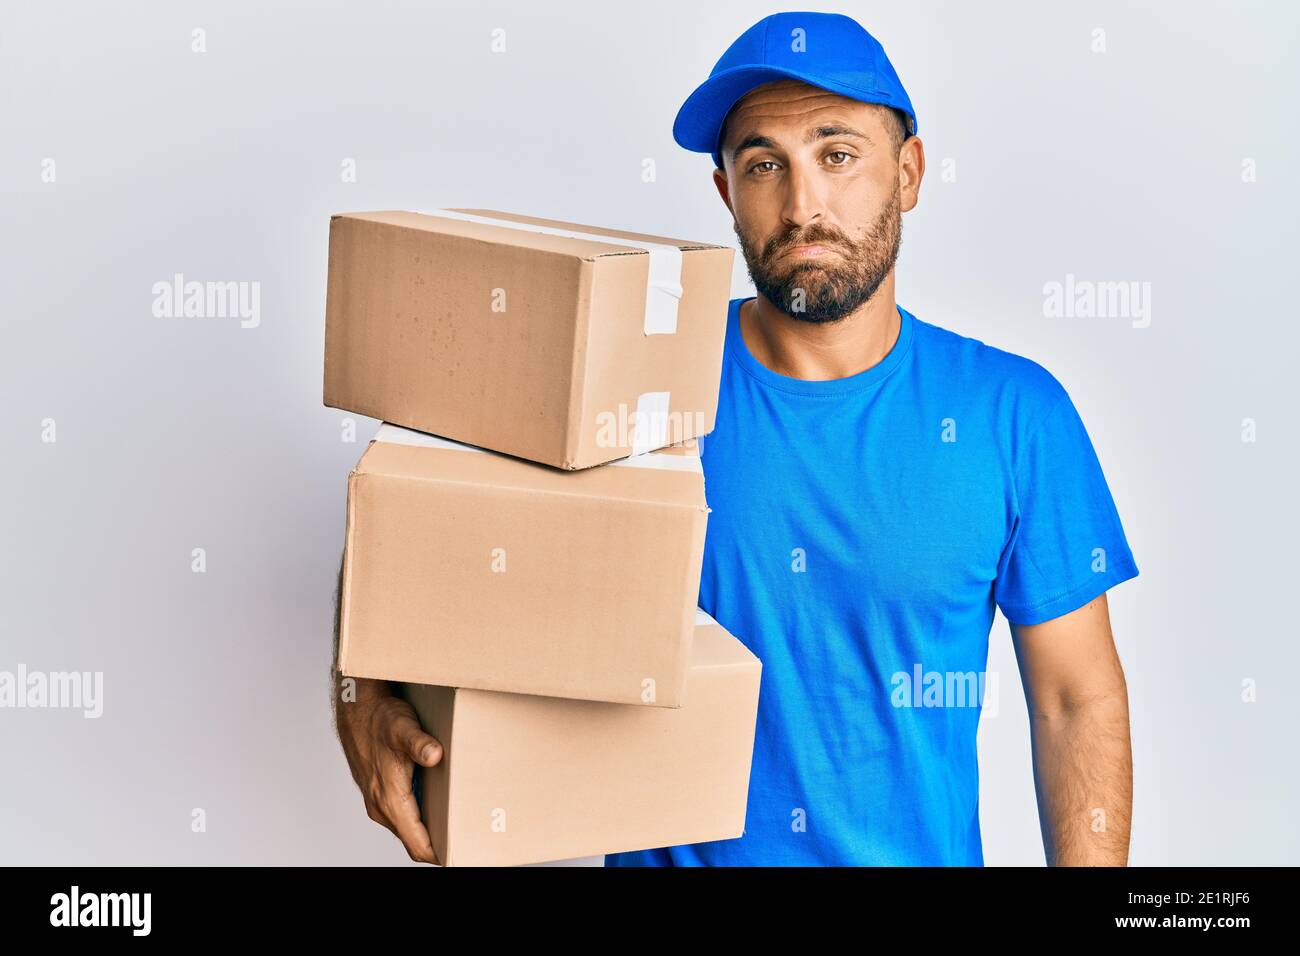 Handsome man with beard wearing courier uniform holding delivery ...